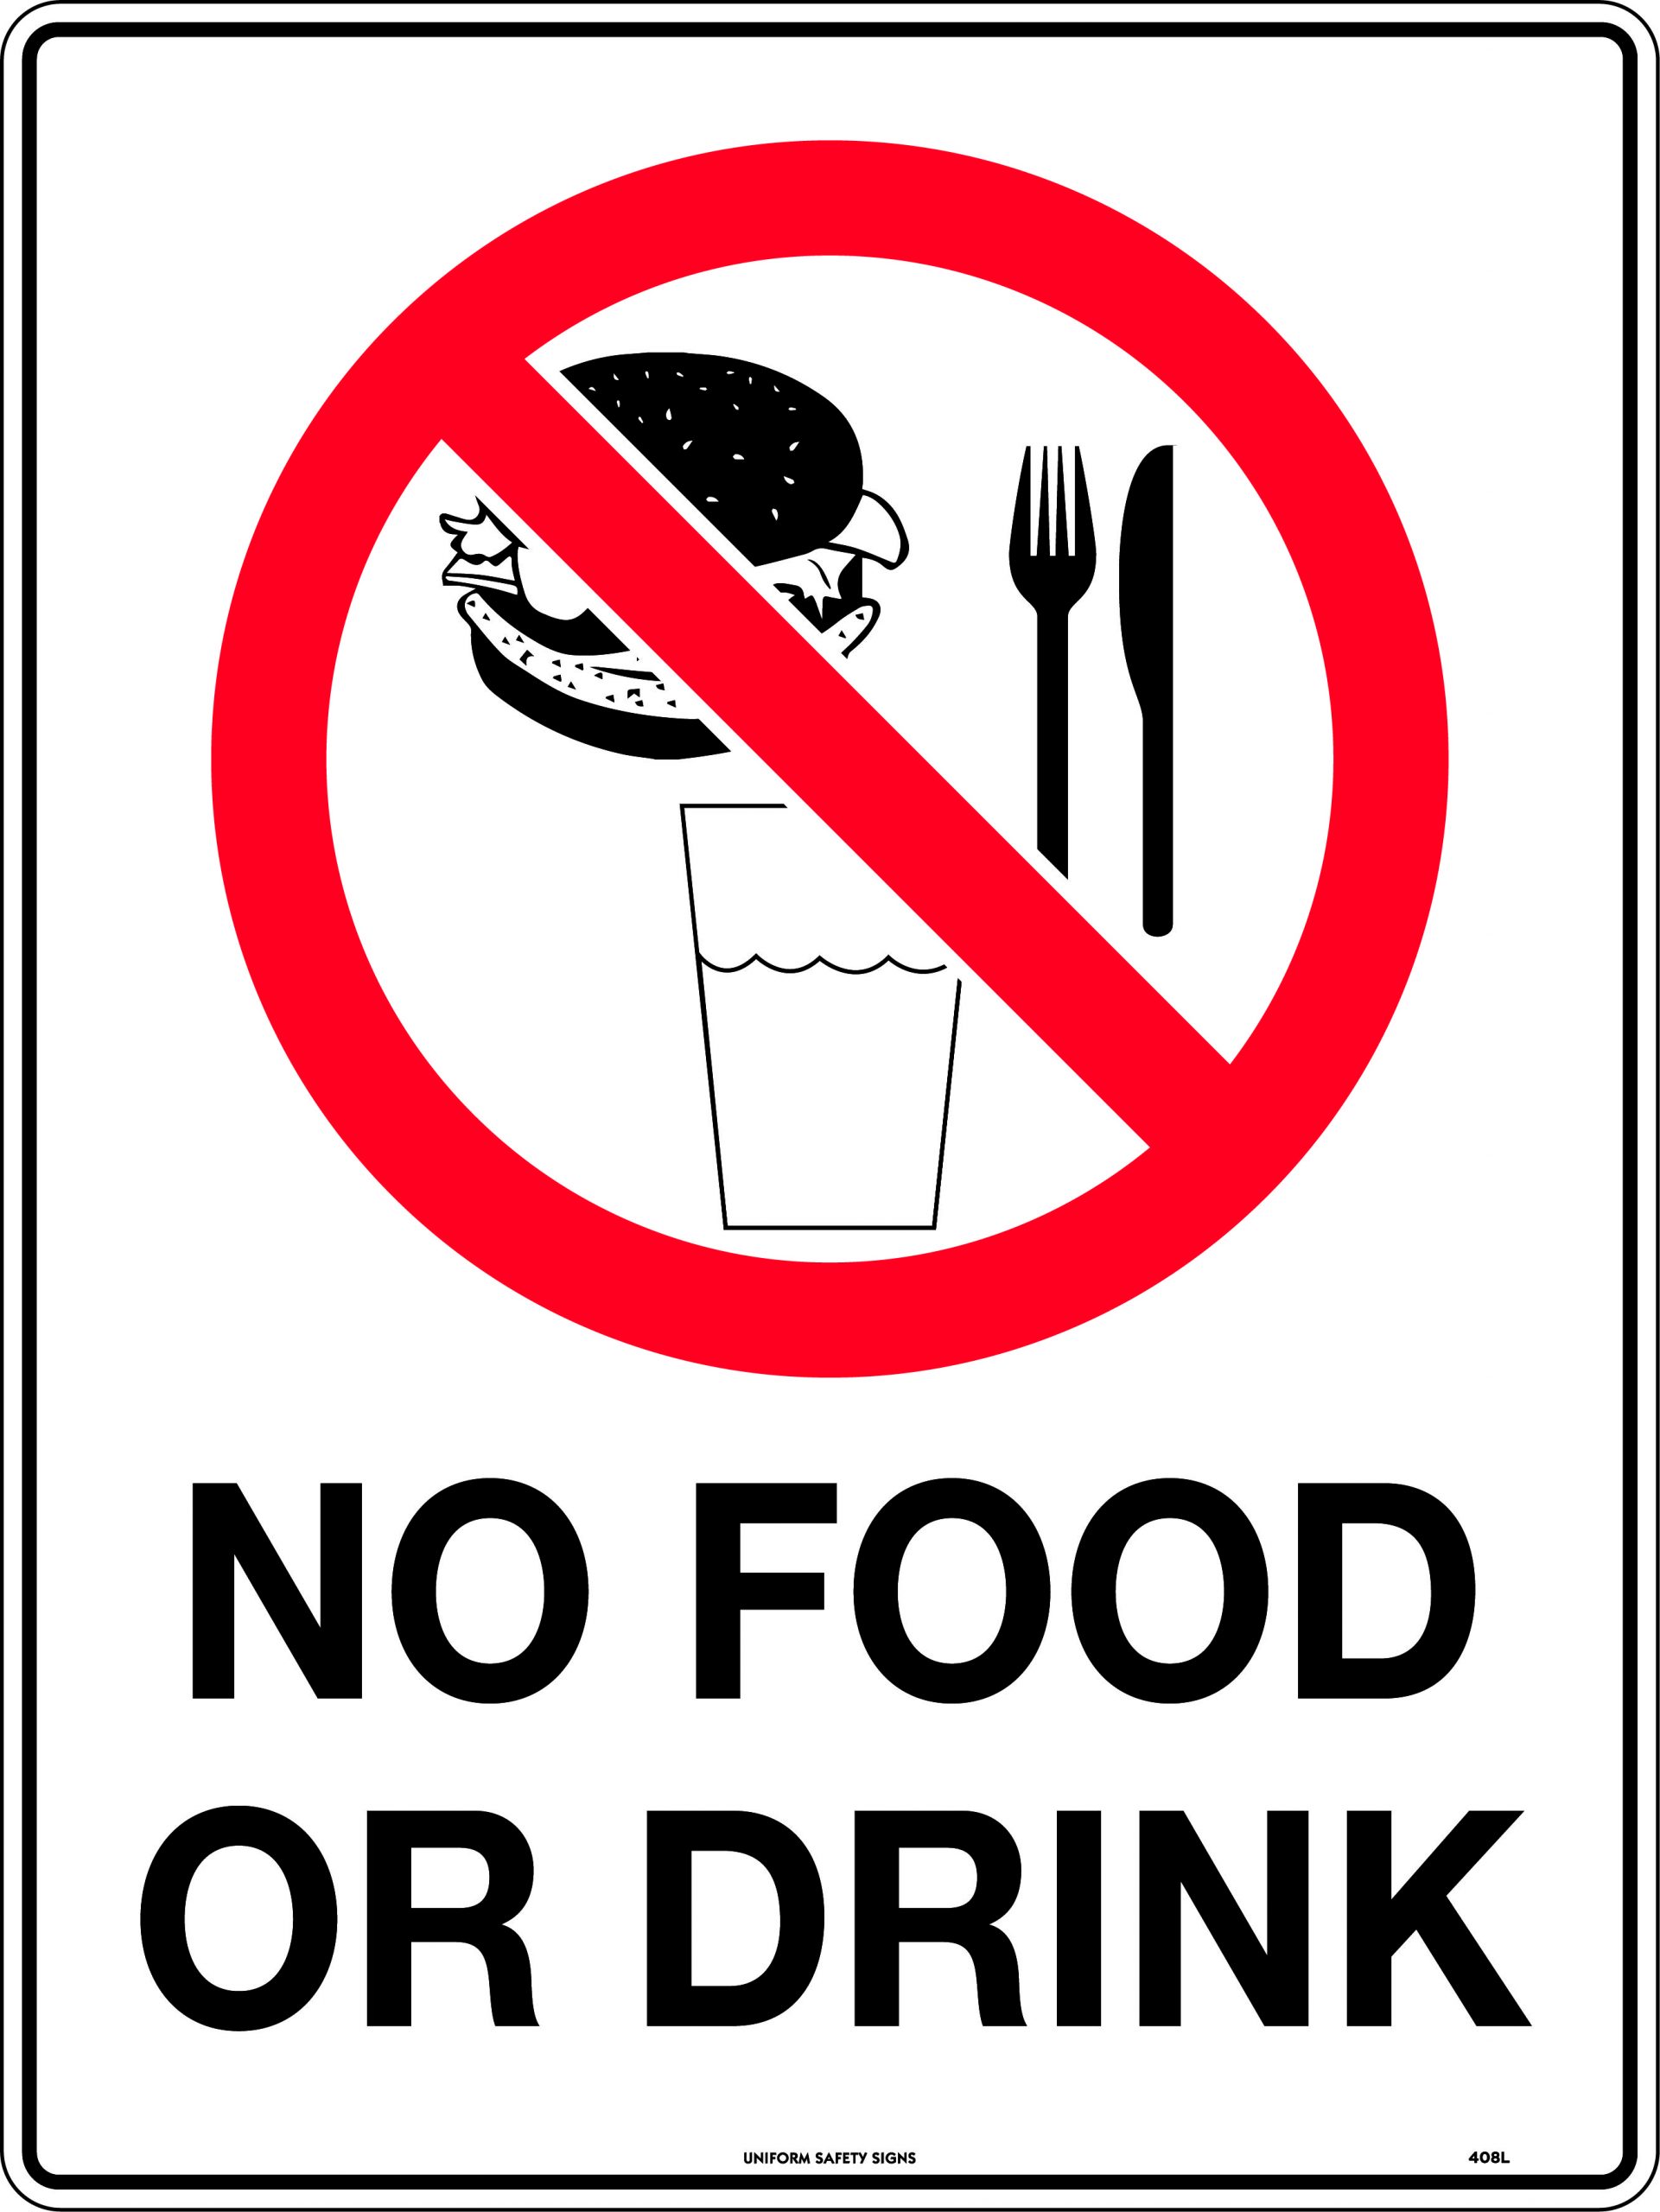 No Food or Drink Uniform Safety Signs